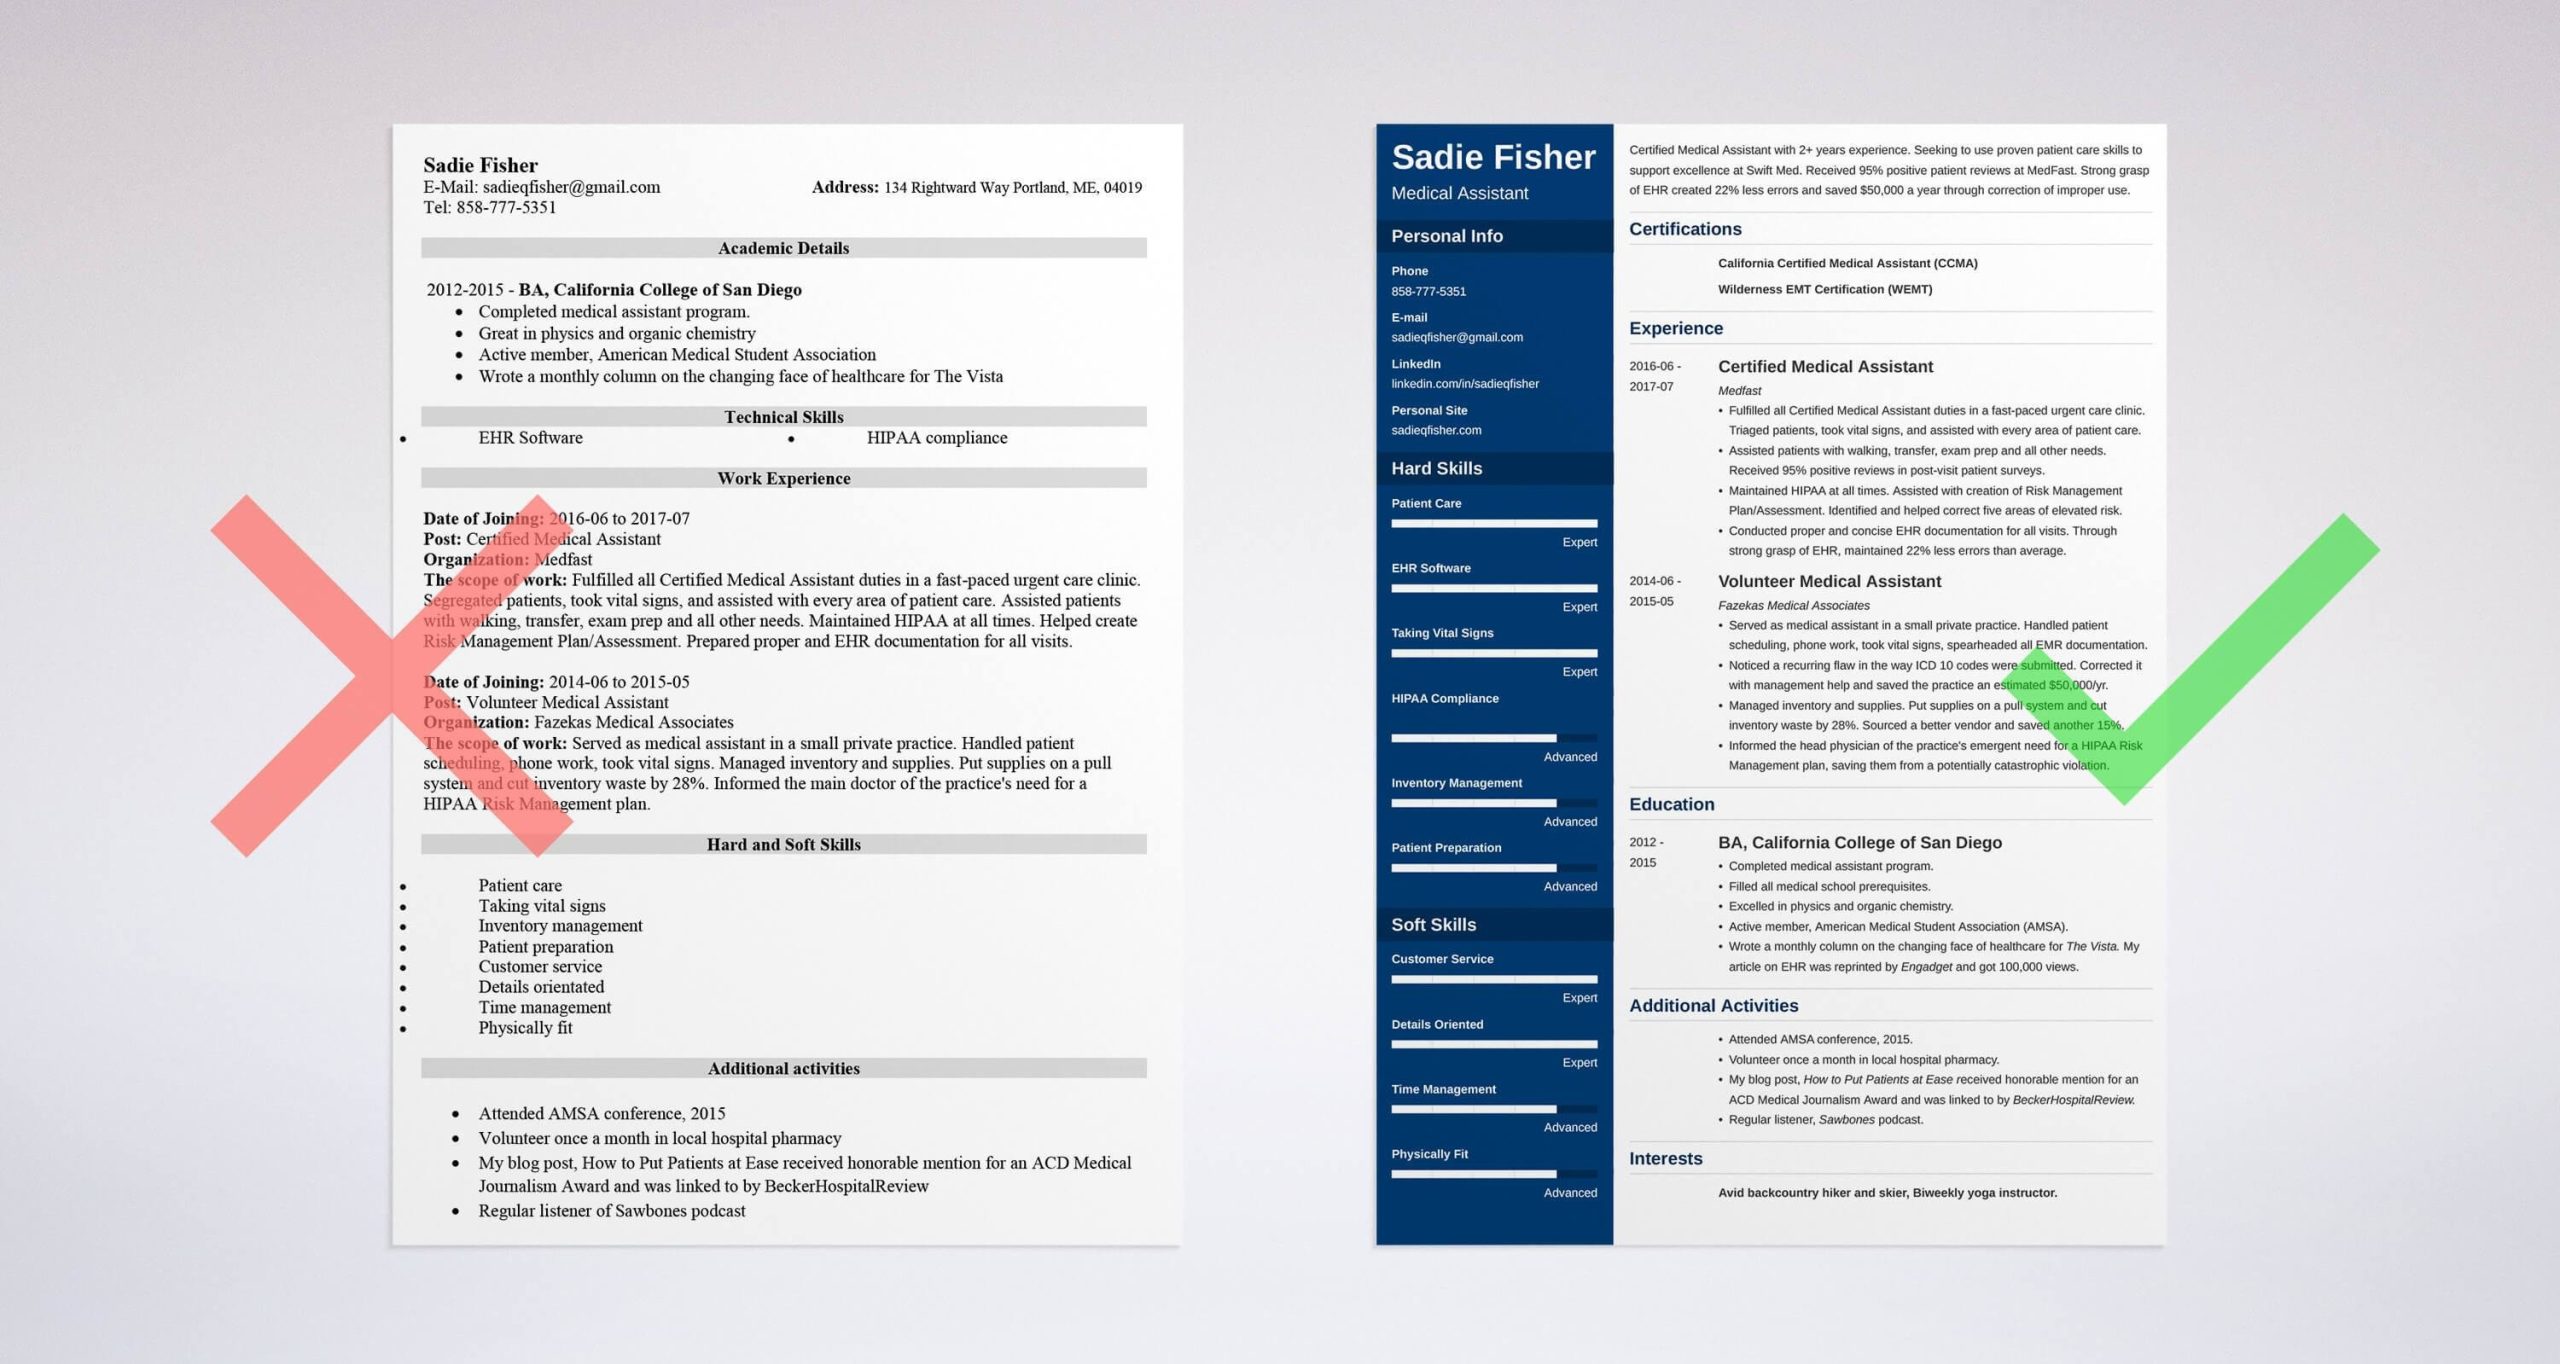 Resume Sample Medical Collections List Of Skills Qualifications Medical assistant Resume Examples: Duties, Skills & Template